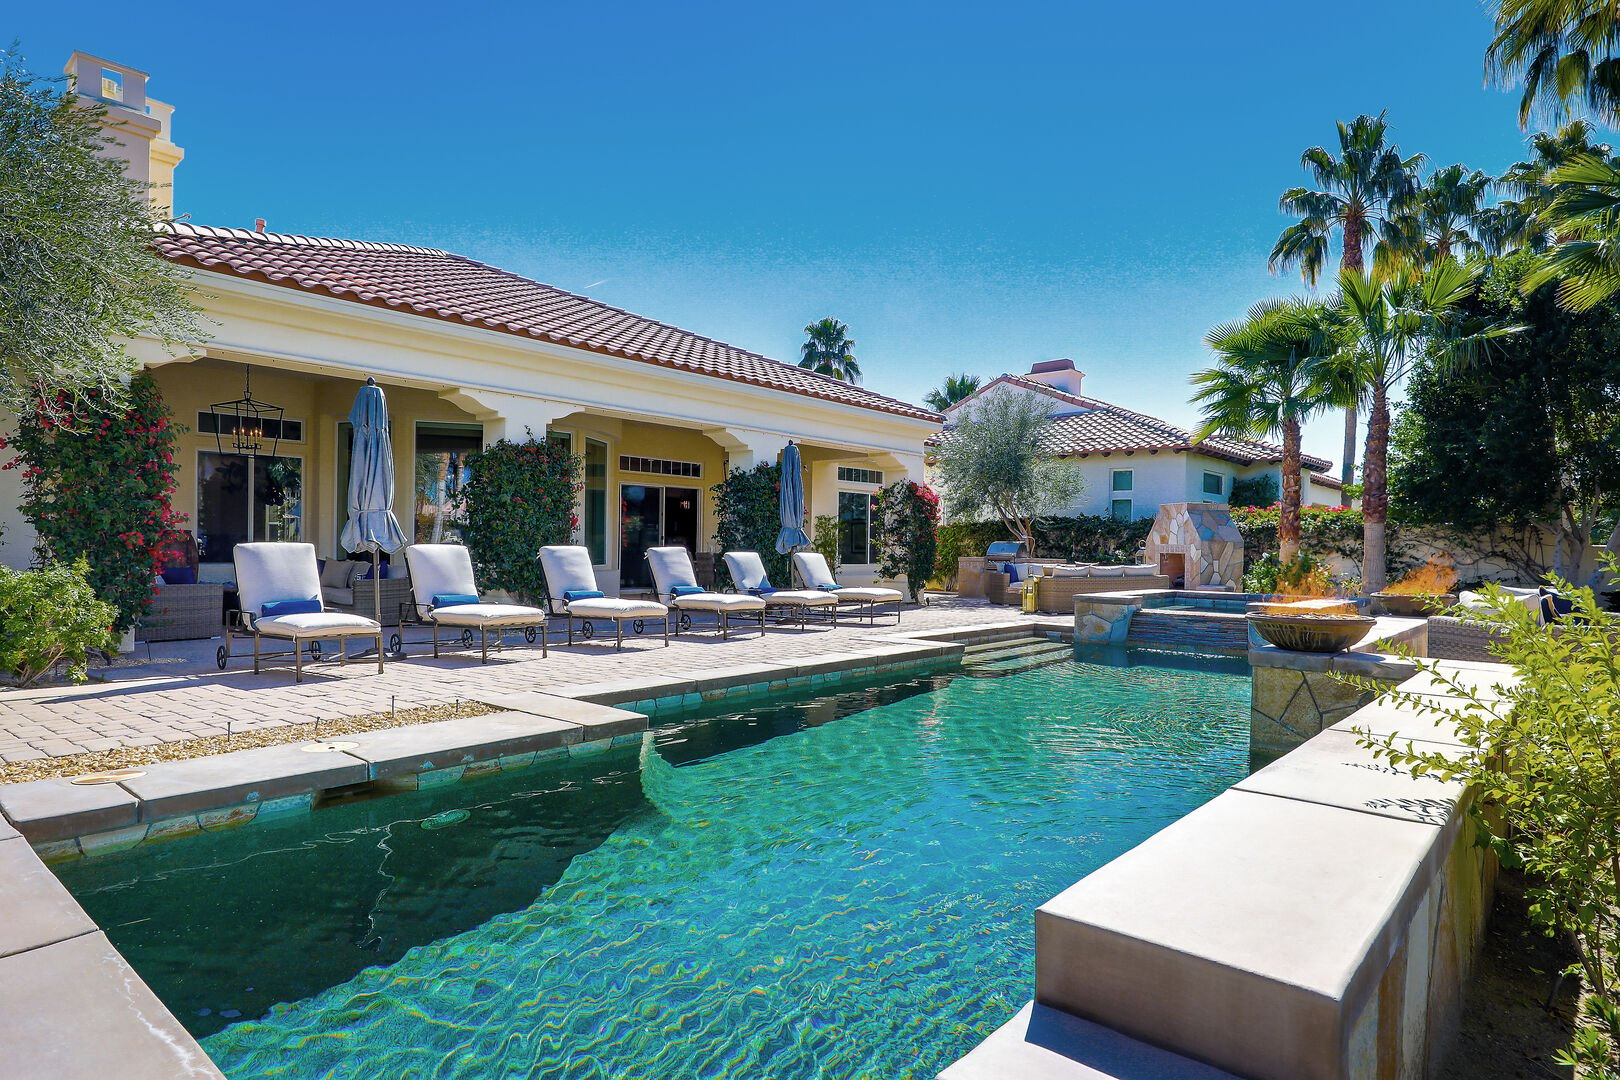 Private, resort-style backyard with fireplace, custom BBQ island, ample seating and al fresco dining.